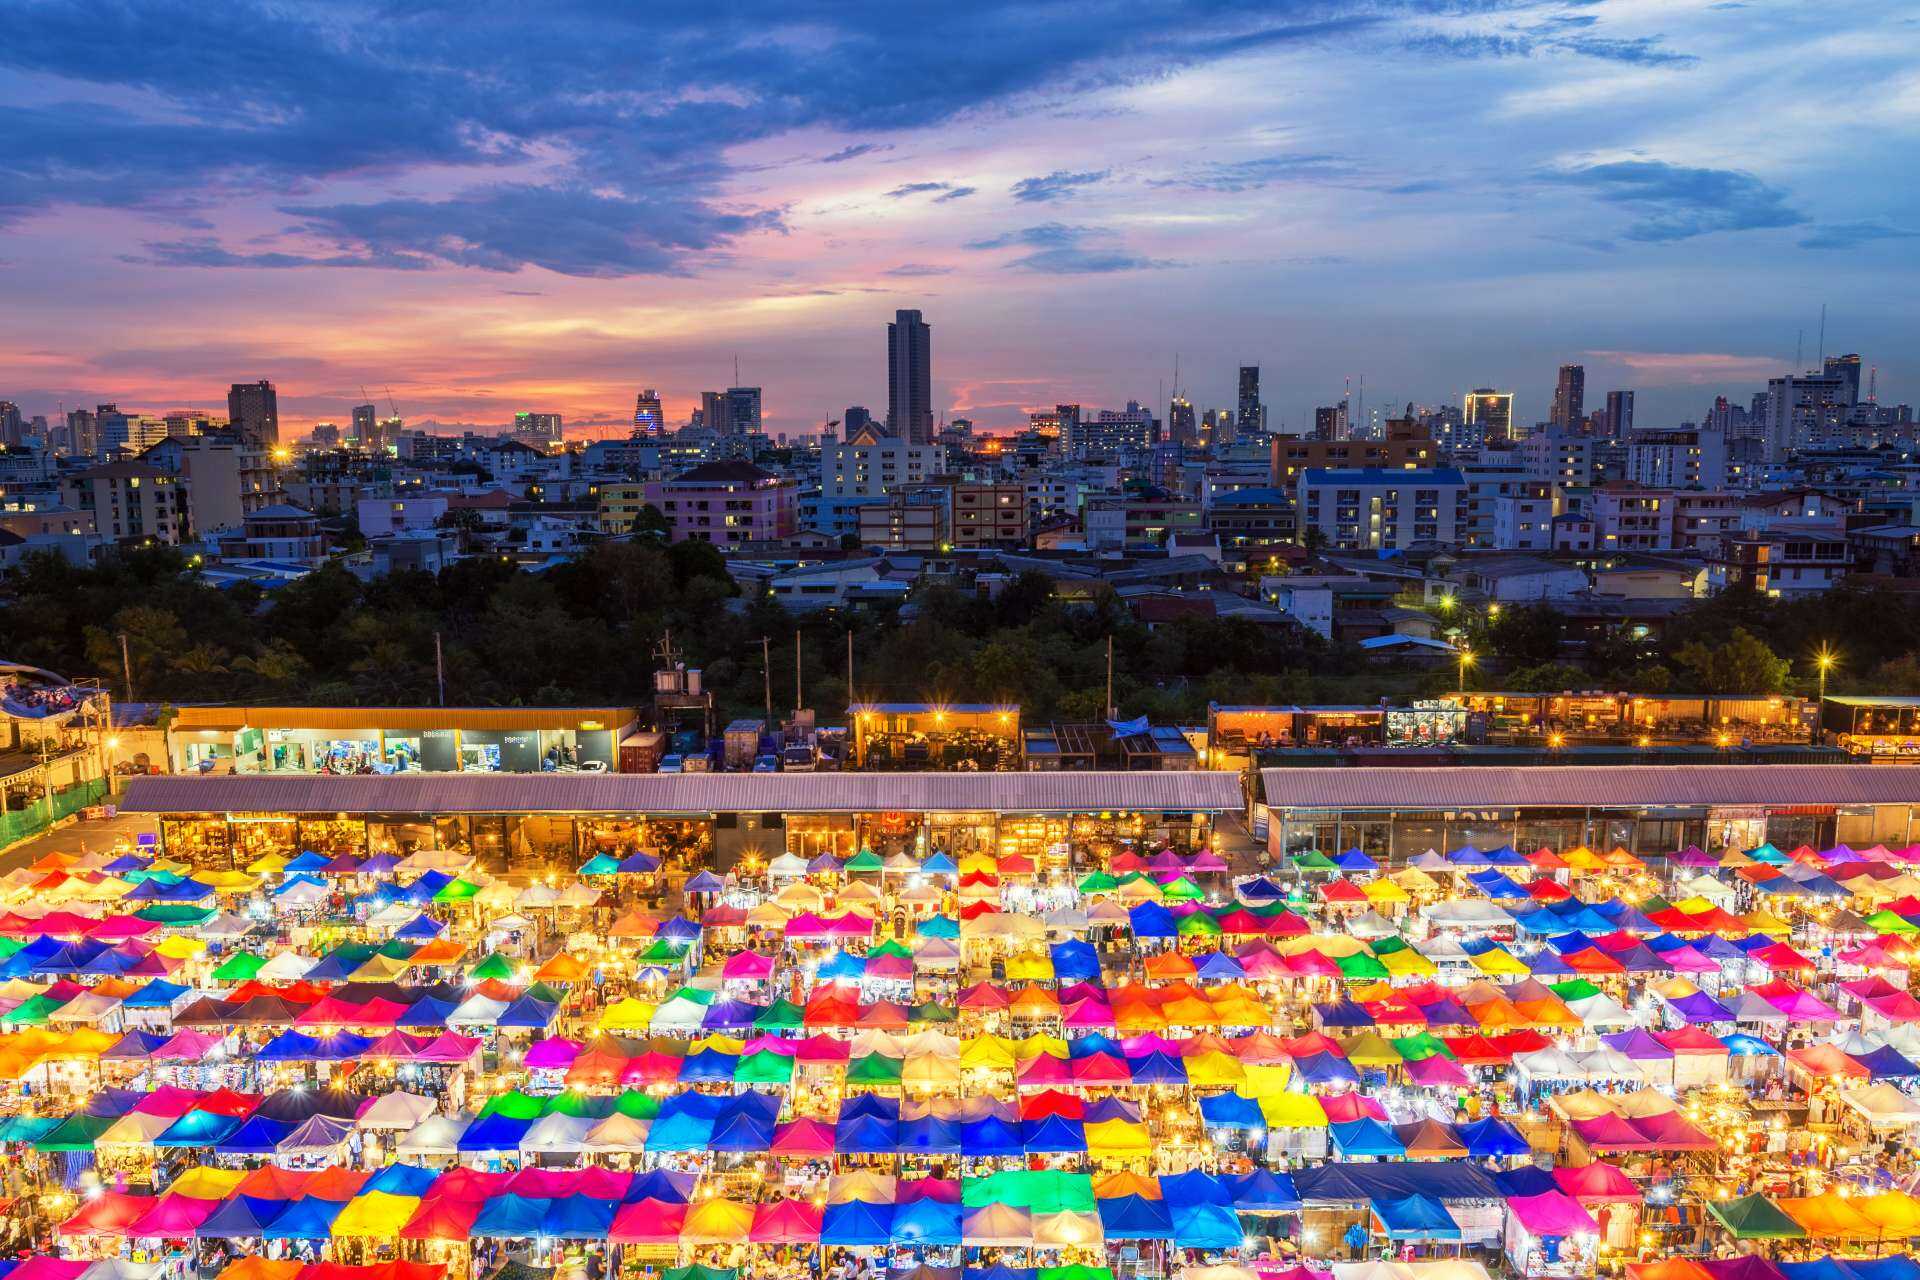 Panoramic view of a large colourful market in Bangkok with apartments and skyscrapers in the background